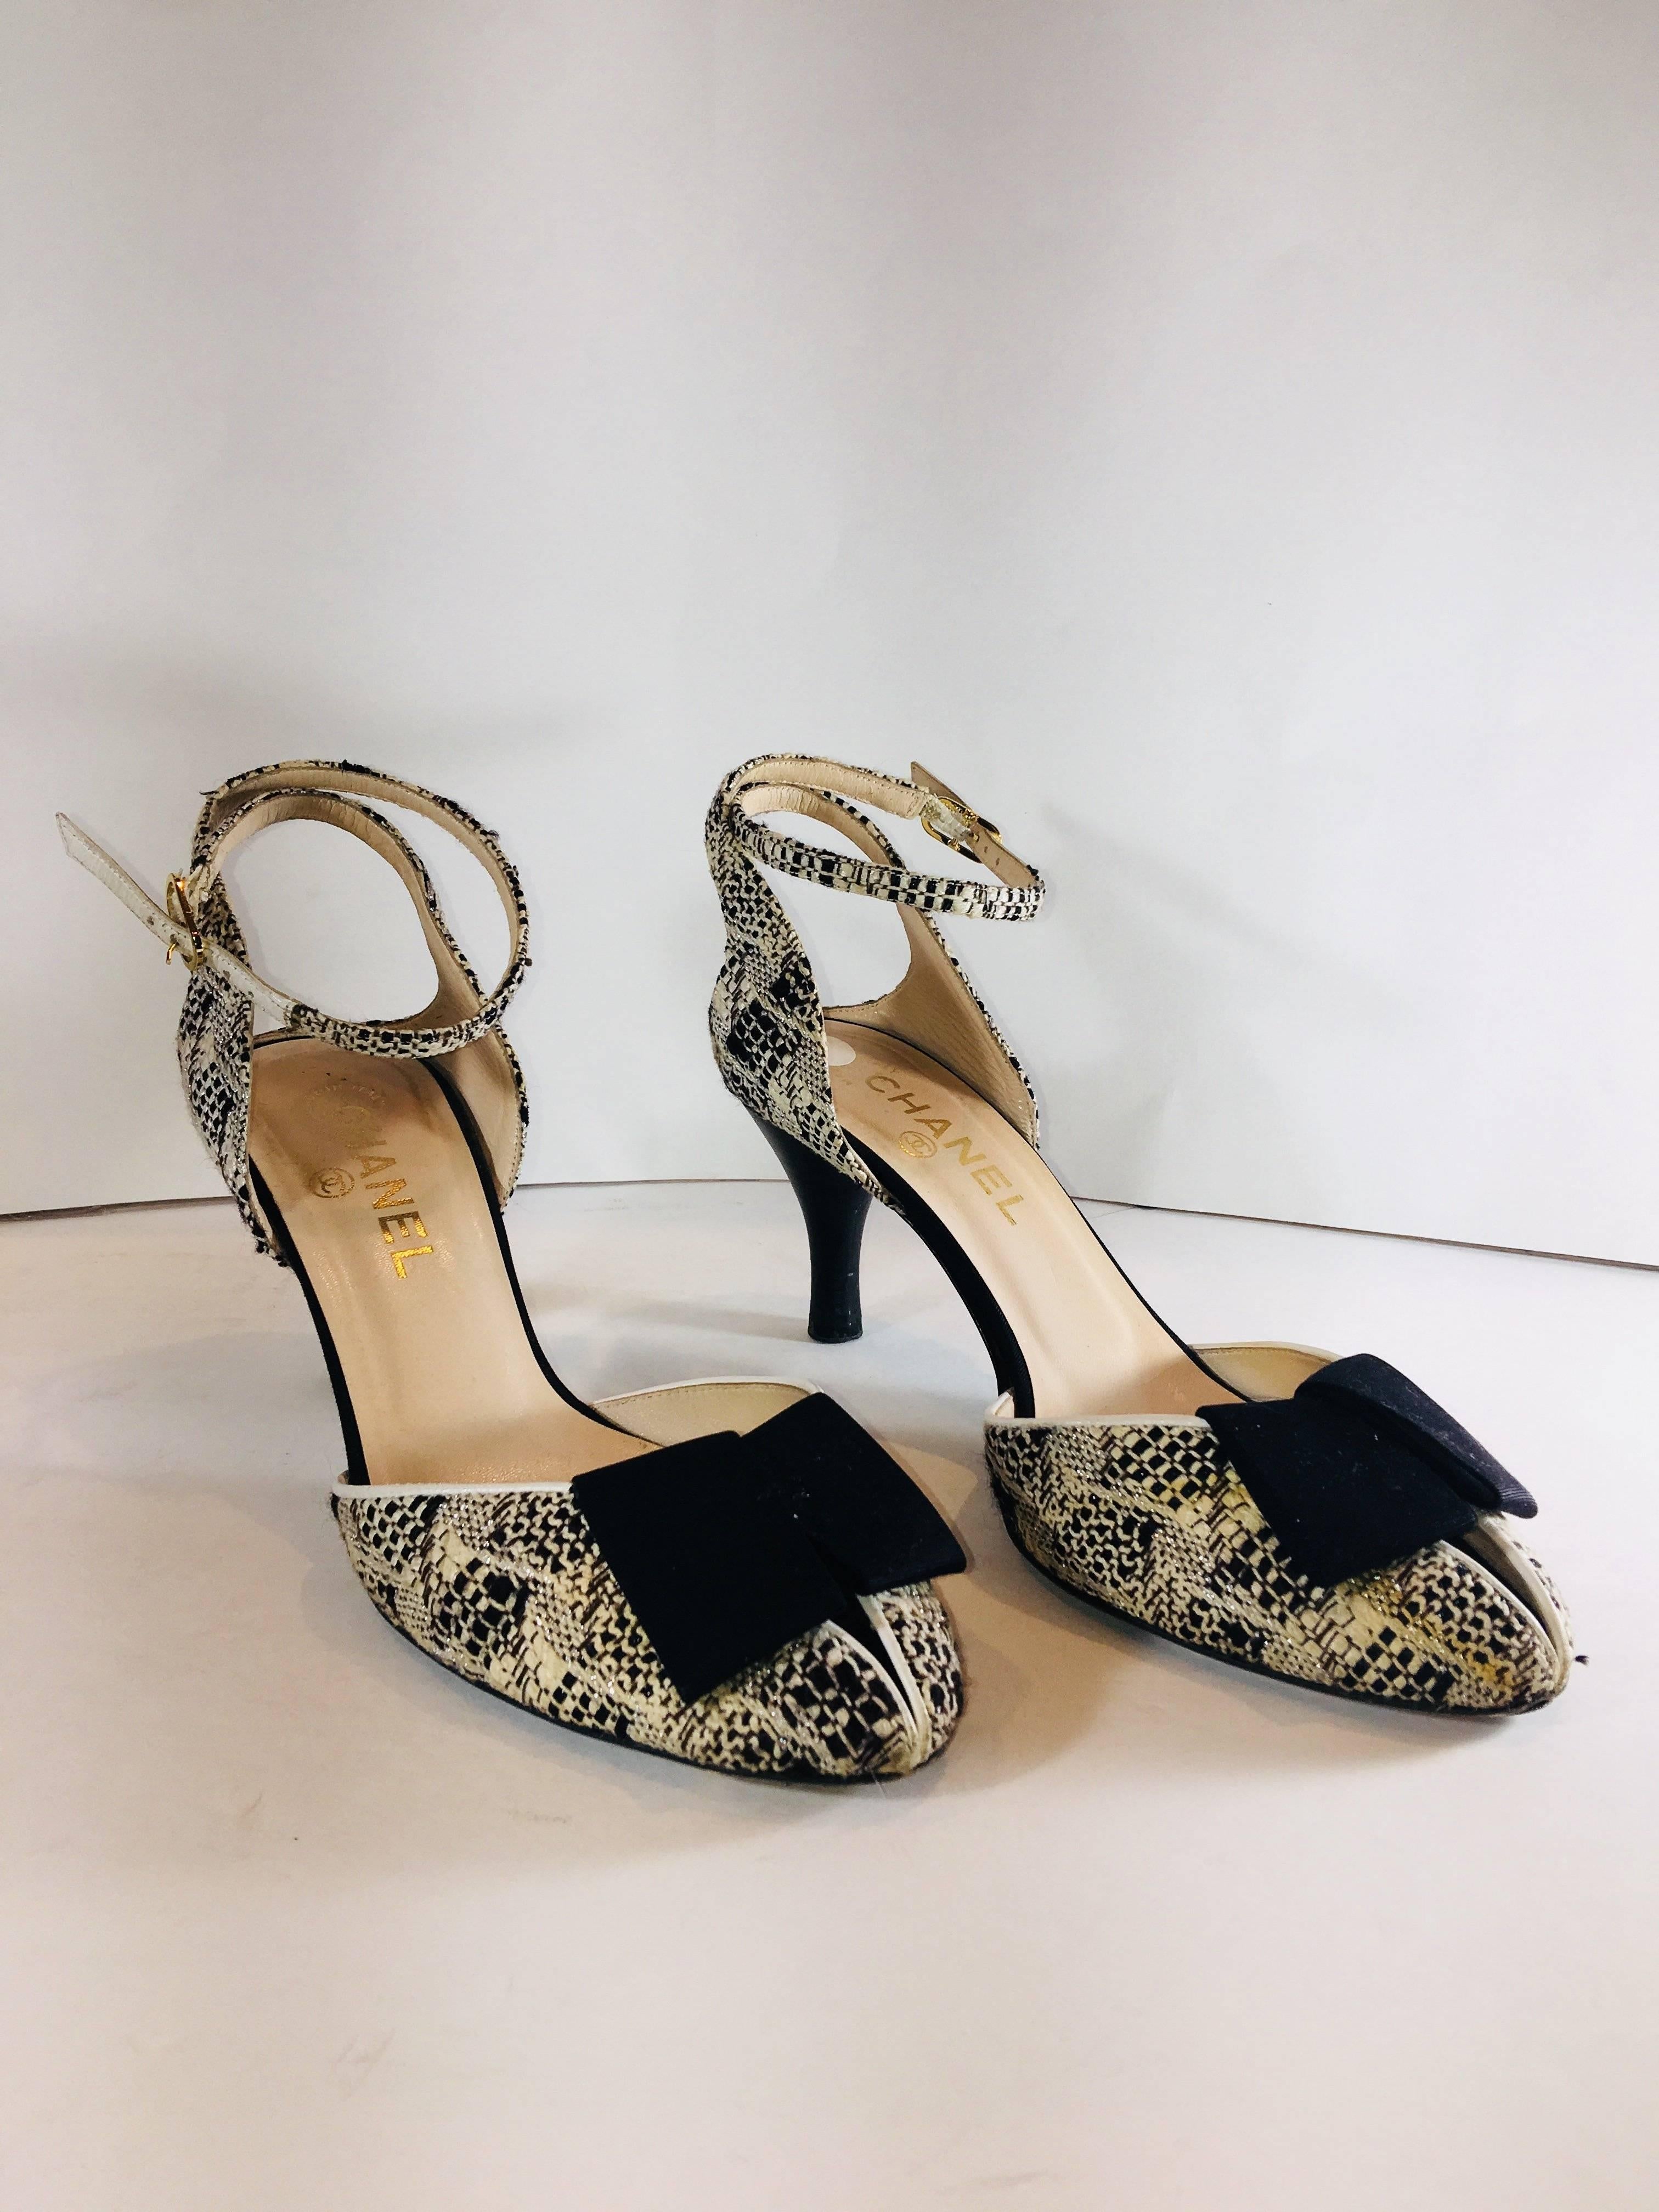 Chanel Round Toe with Ribbon Bow Accents at Toe and Ankle Strap in Black and White and Metallic Tweed Pattern and Gold Hardware. 